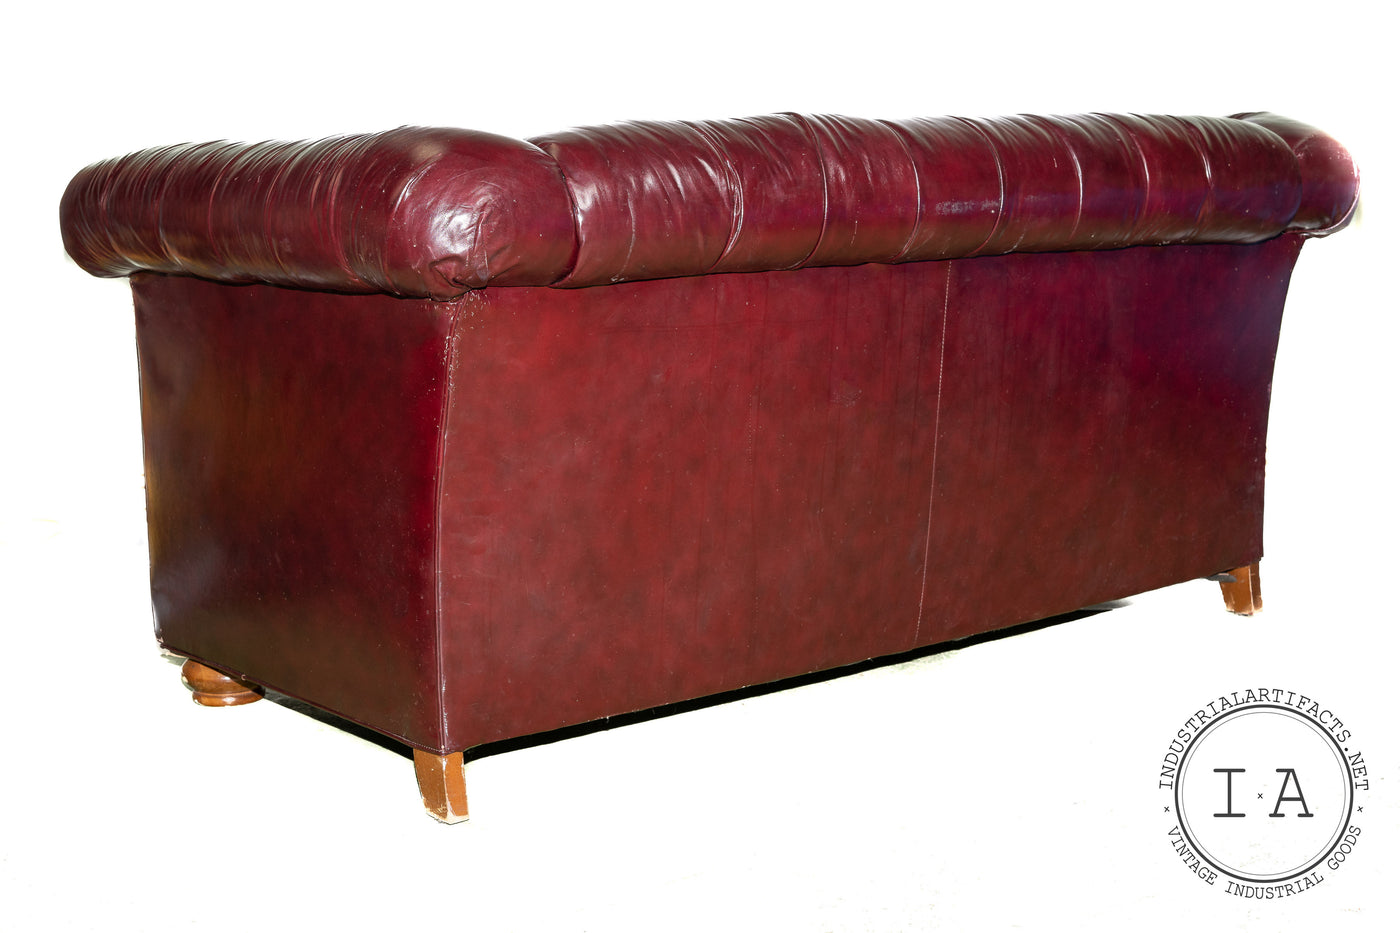 Tufted Leather Oxblood Chesterfield Sofa